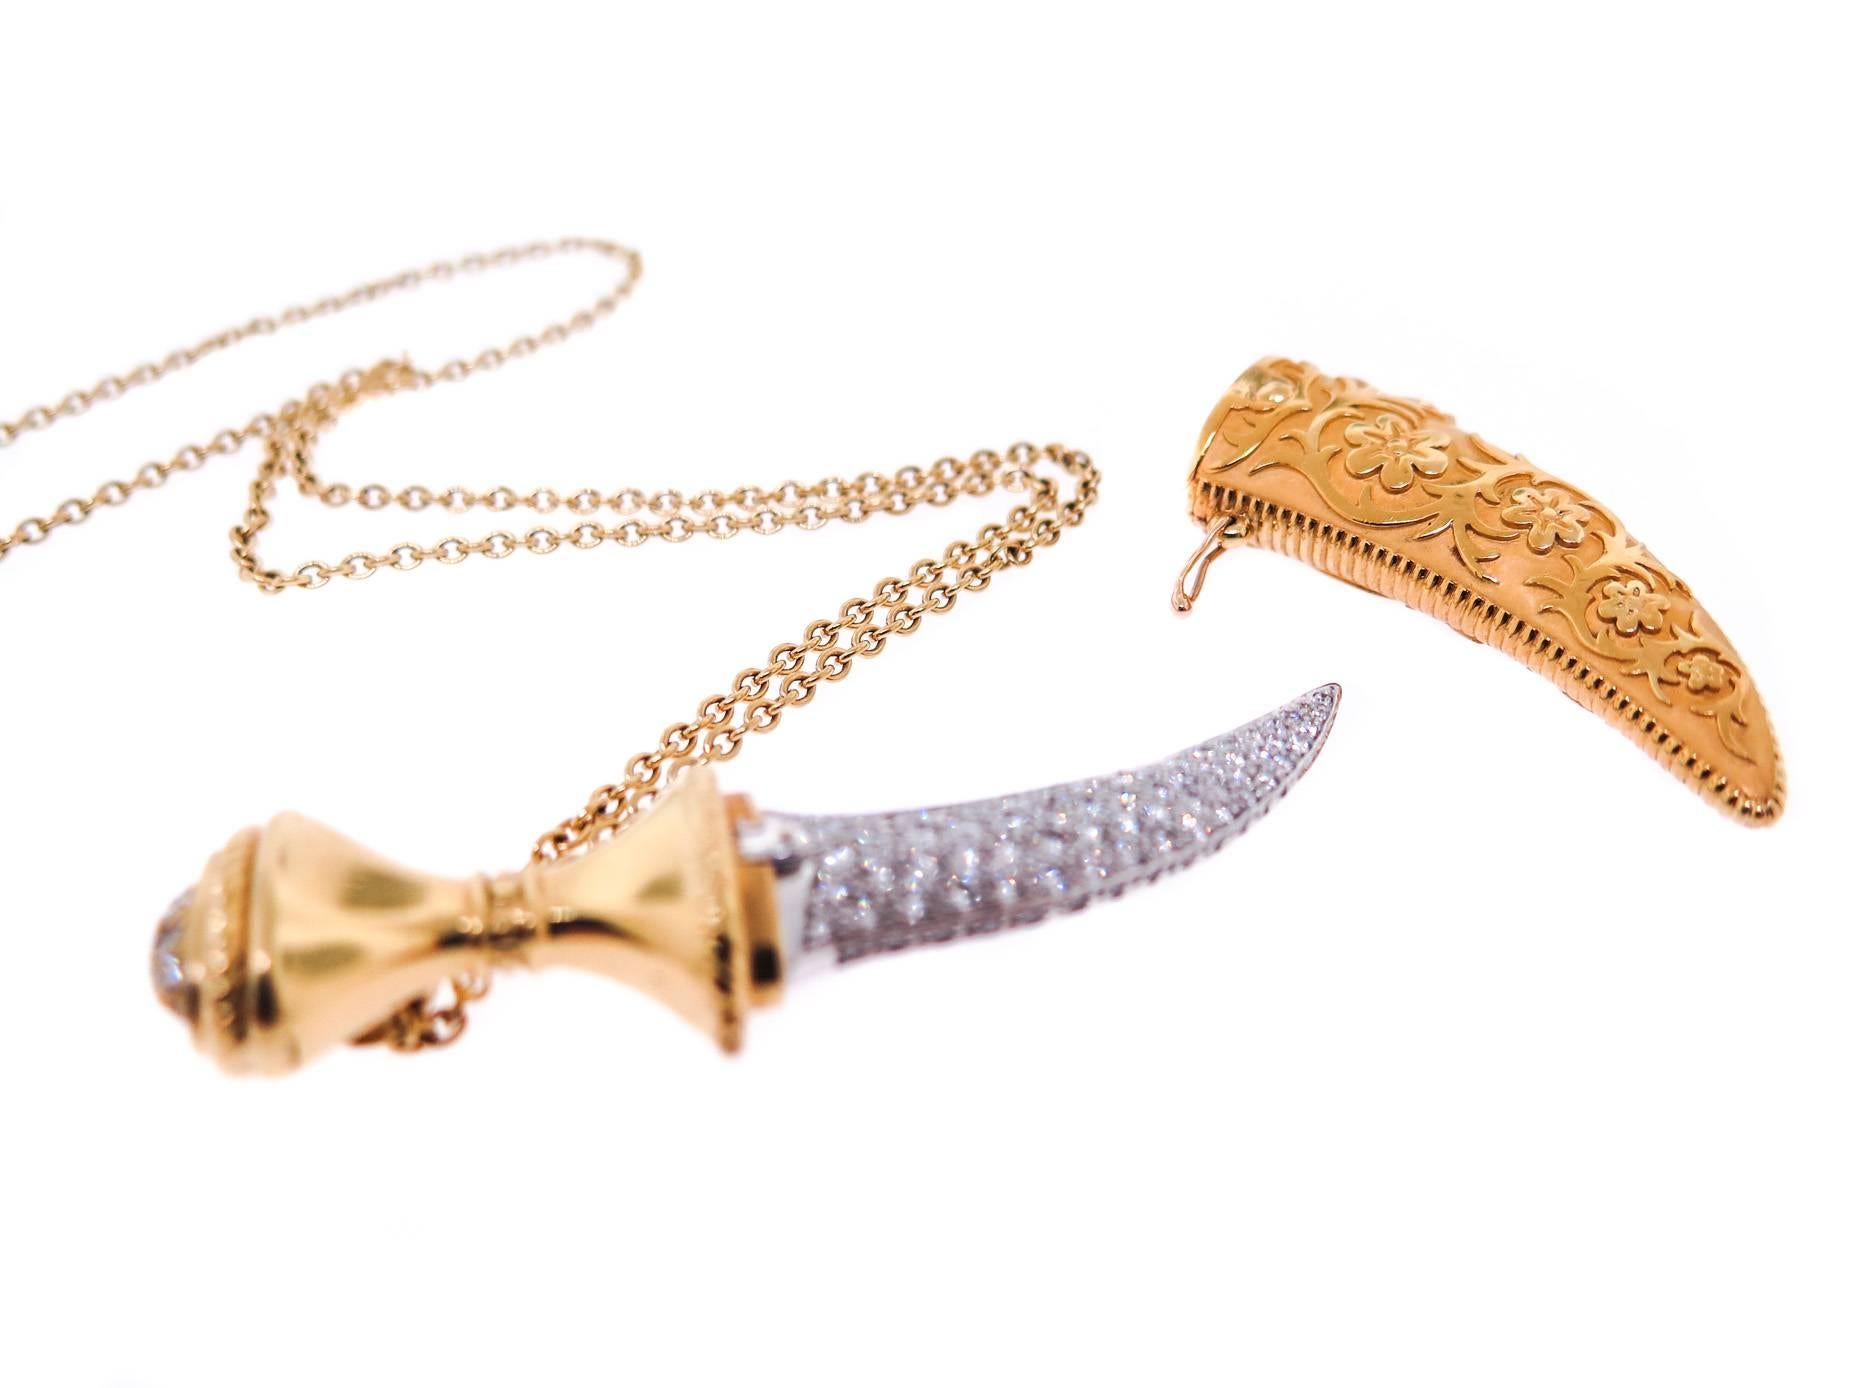 Carrera Y Carrera 18 Karat Yellow Gold Diamond Encrusted Dagger and Sheath Pendant. One of three offered for sale in the United States. Diamonds are E-F color, VVS clarity, with a total weight of 2.22 carats Signed and numbered 473280. Measures